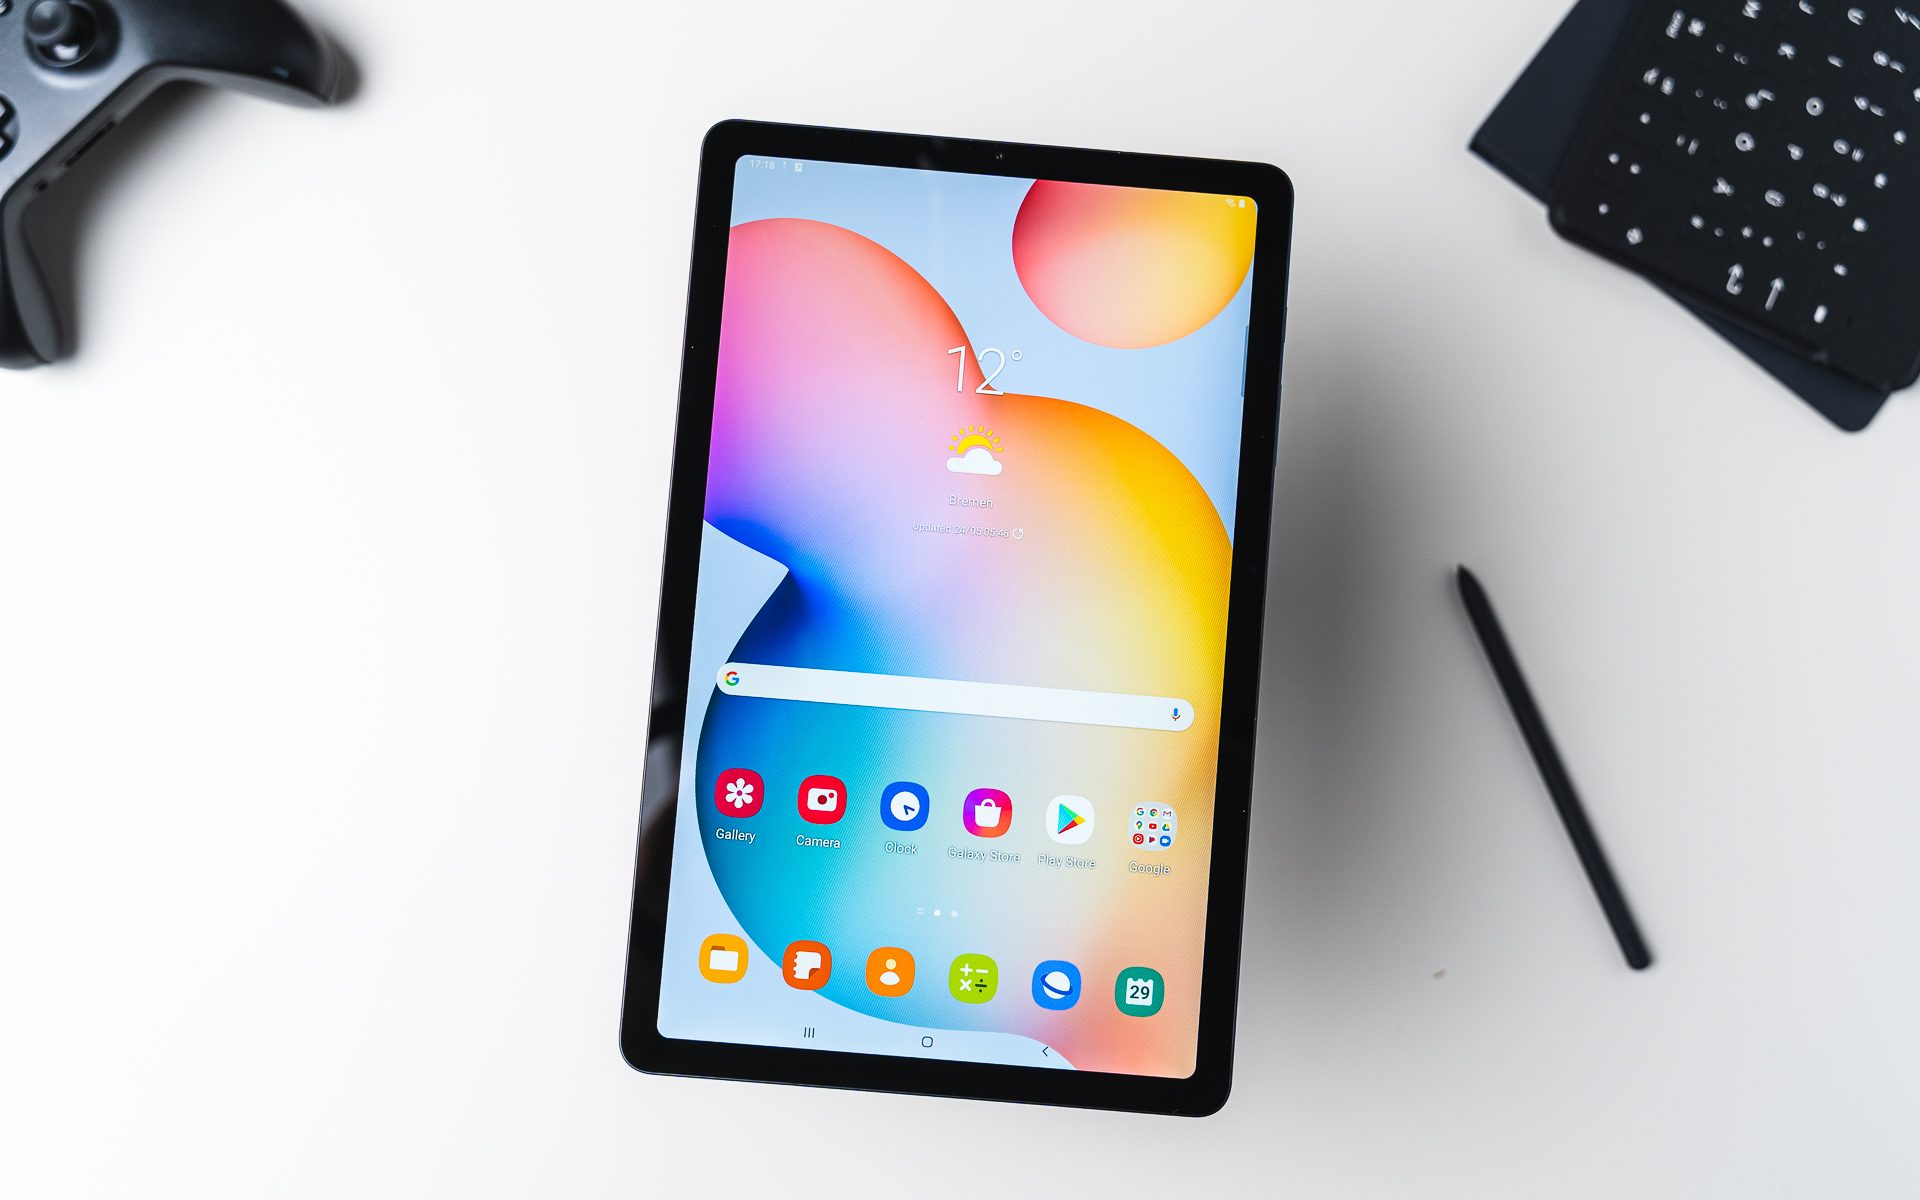 Samsung Galaxy Tab S6 Lite review: Bringing the S Pen to the masses -  SamMobile